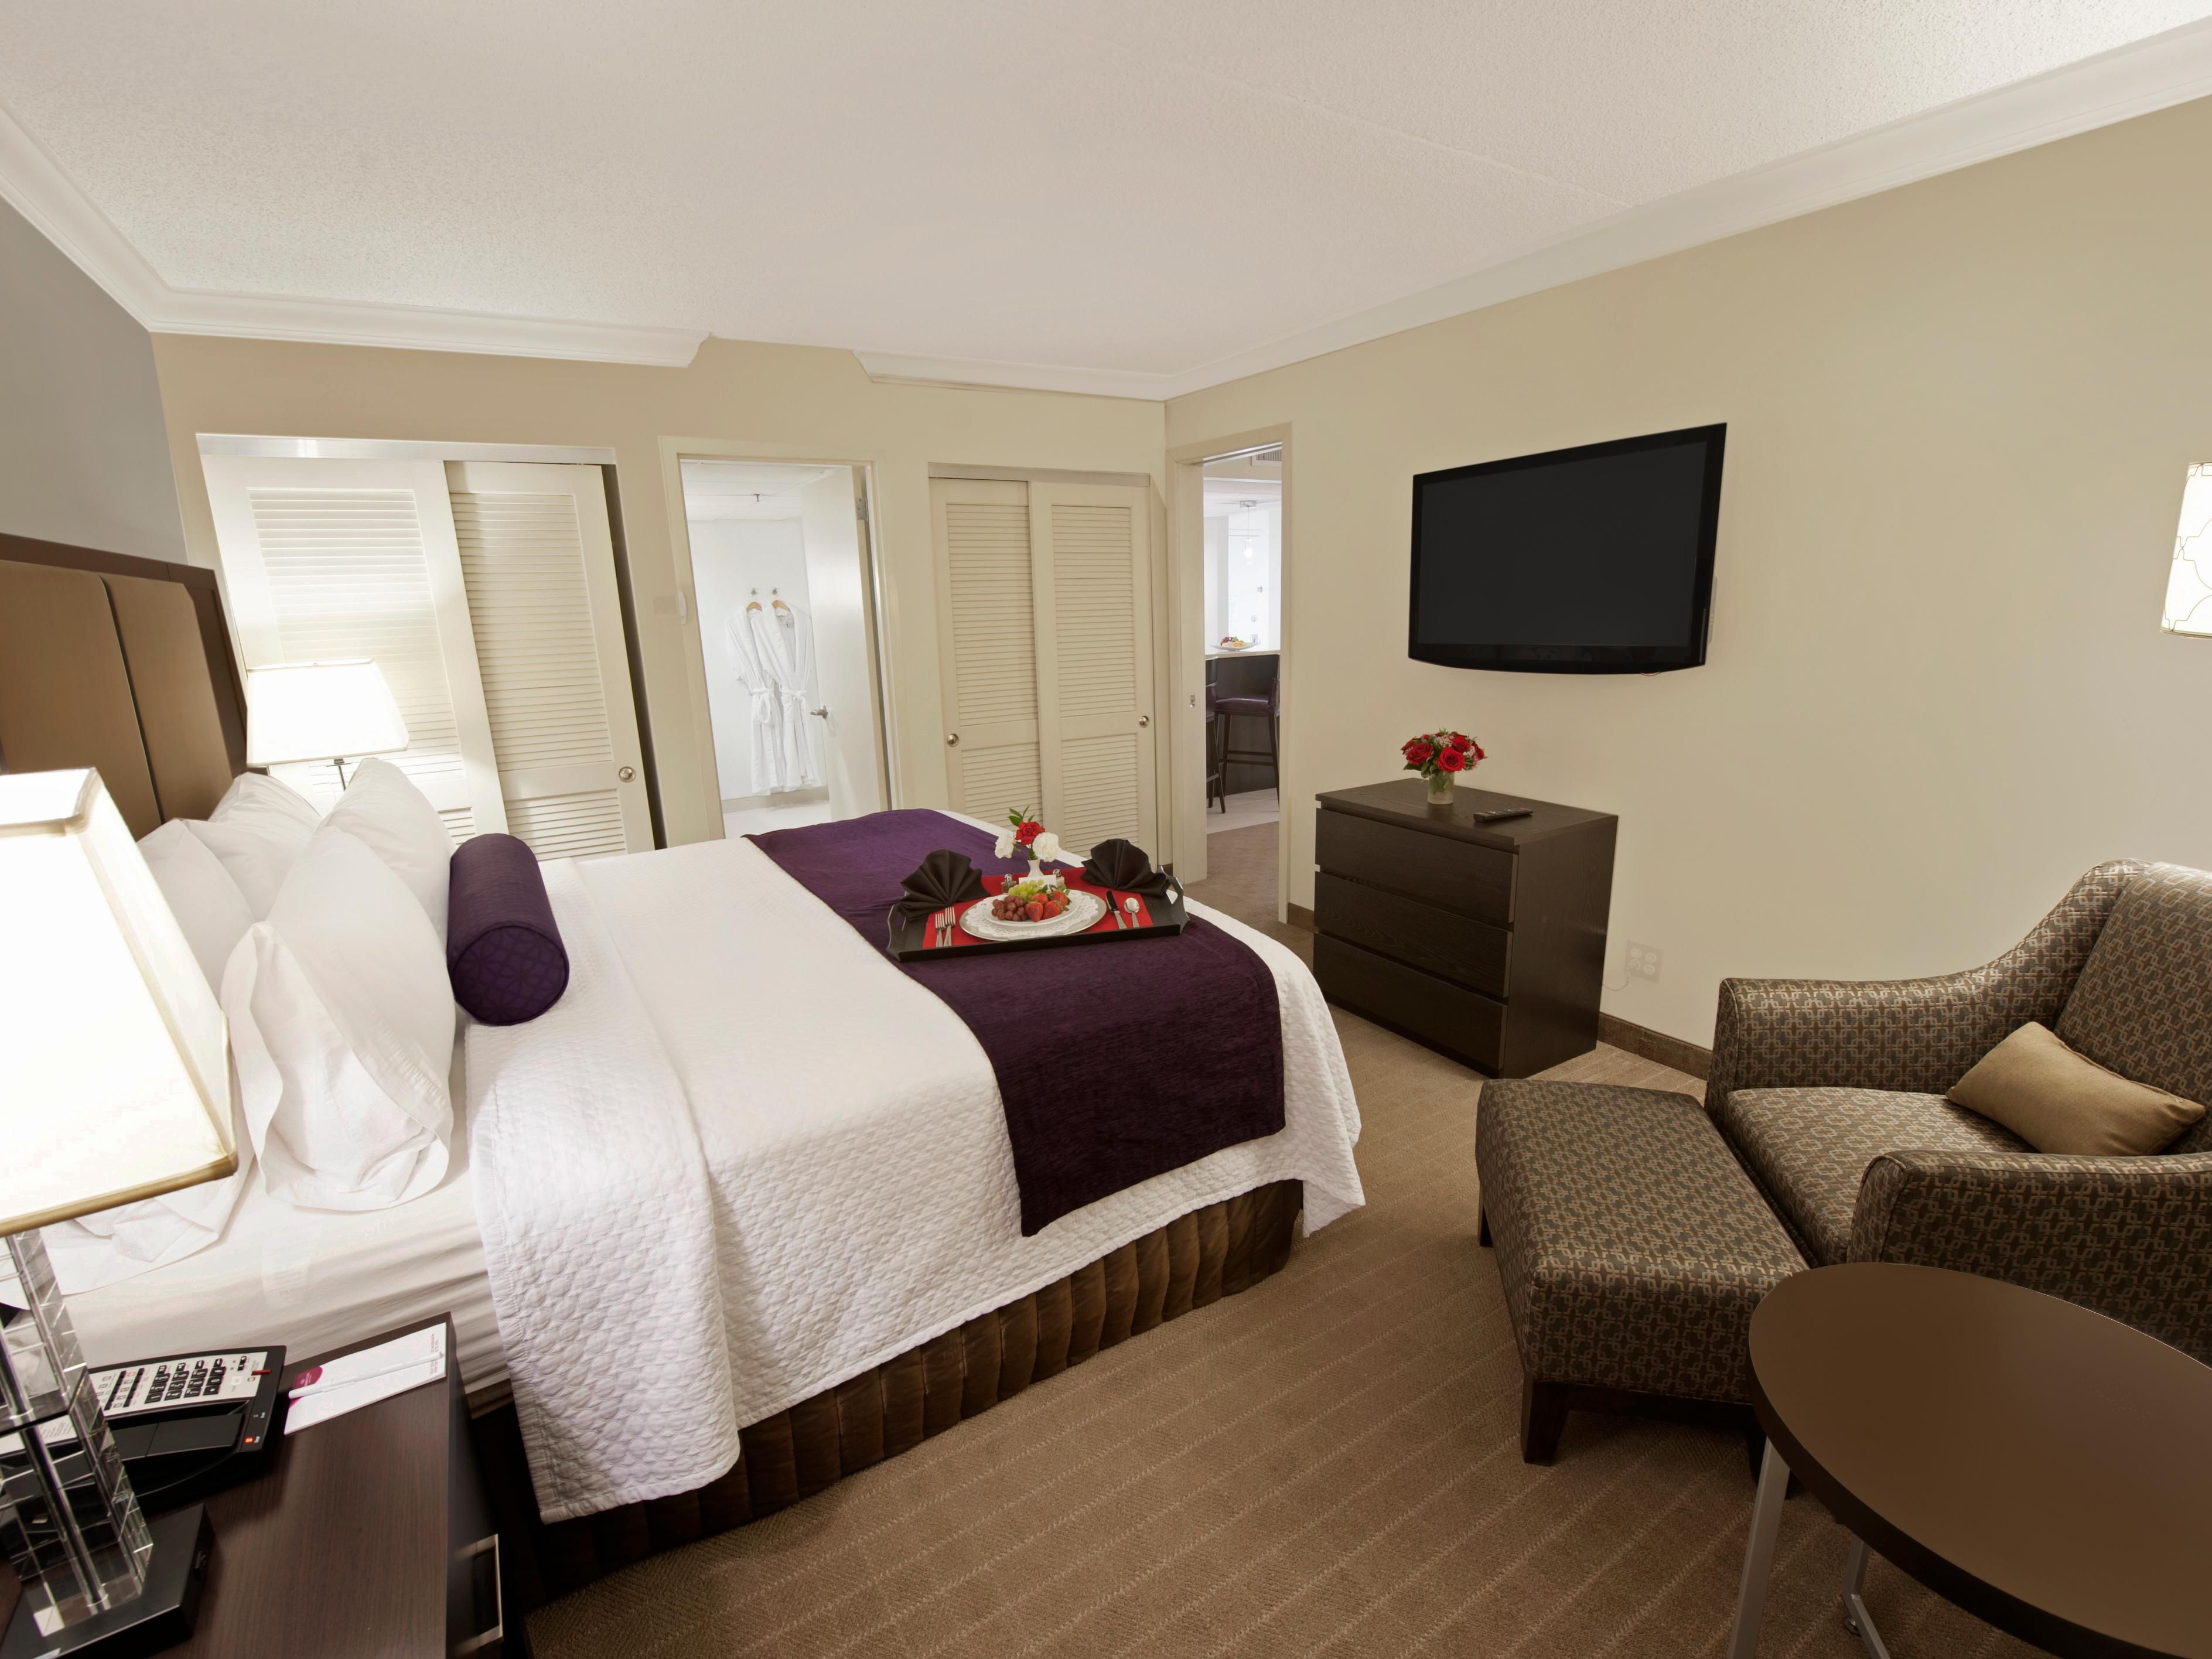 Our Top of the Crowne Executive guest rooms are the perfect choice for guests looking for an elevated experience. These elite guest rooms are situated in a private area of the hotel with key access and a variety of exclusive services and amenities. Book now and take your stay to the next level.